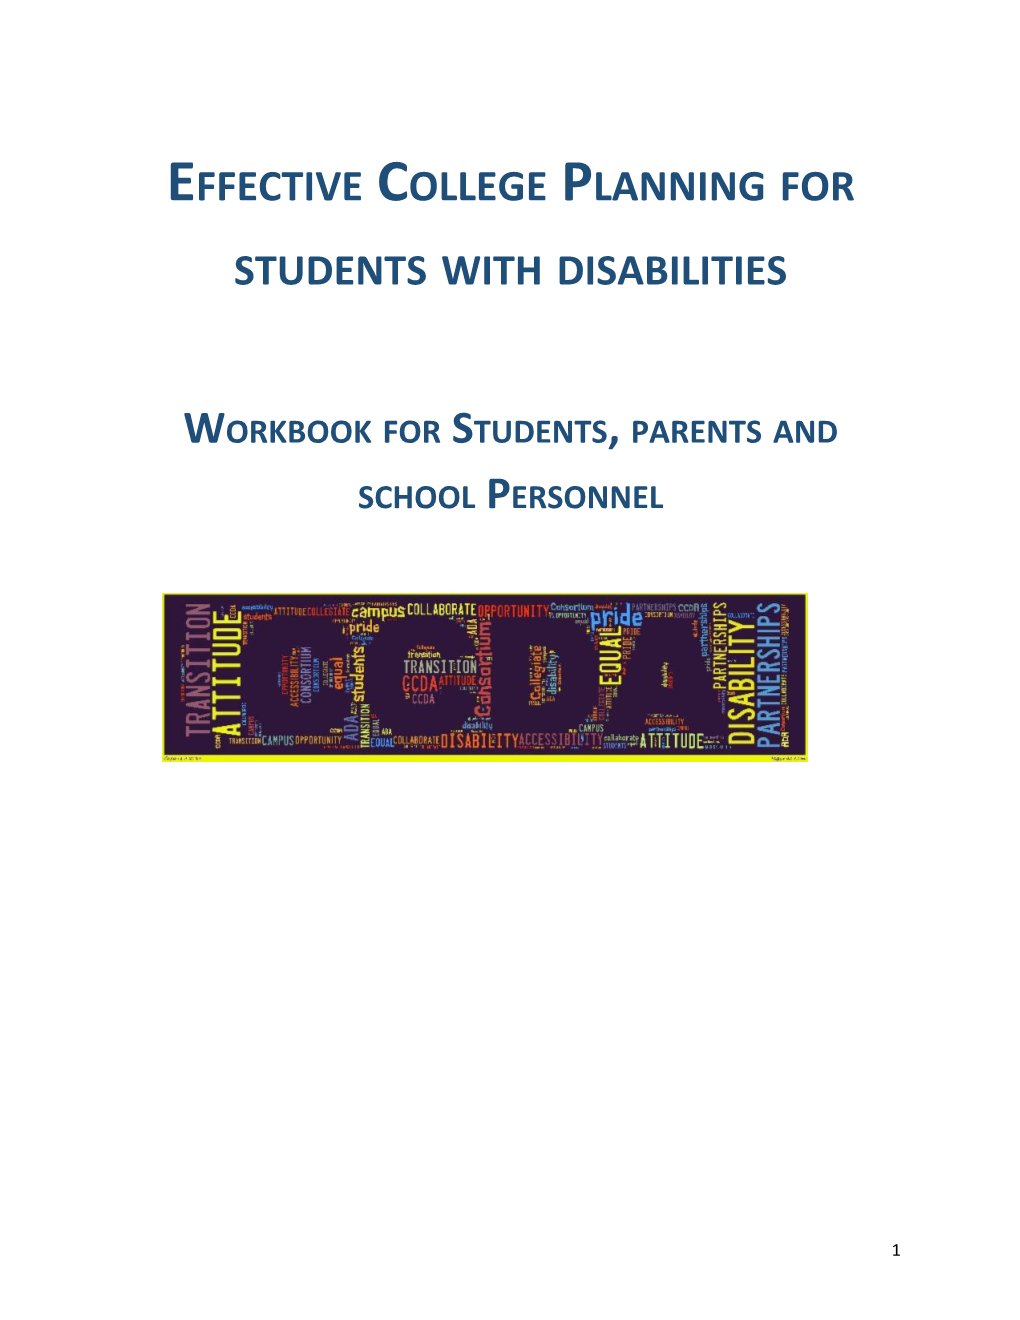 Effective College Planning for Students with Disabilities